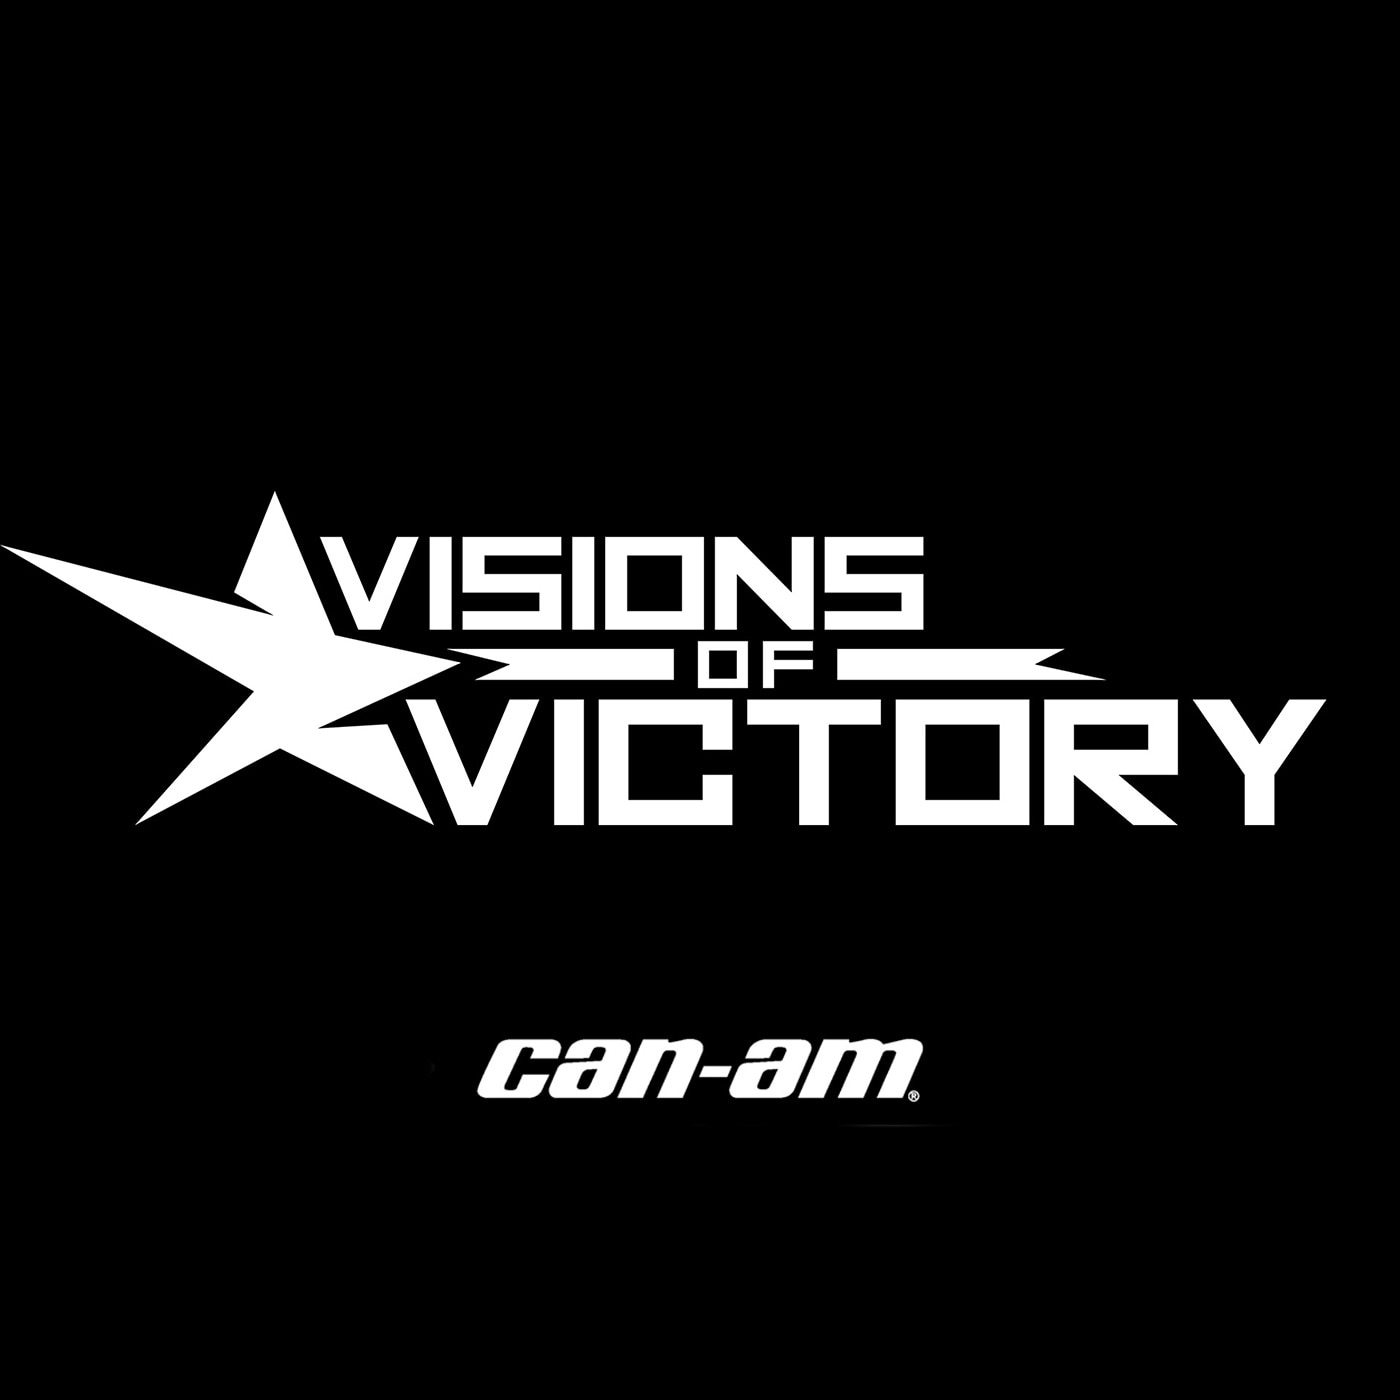 Visions of Victory